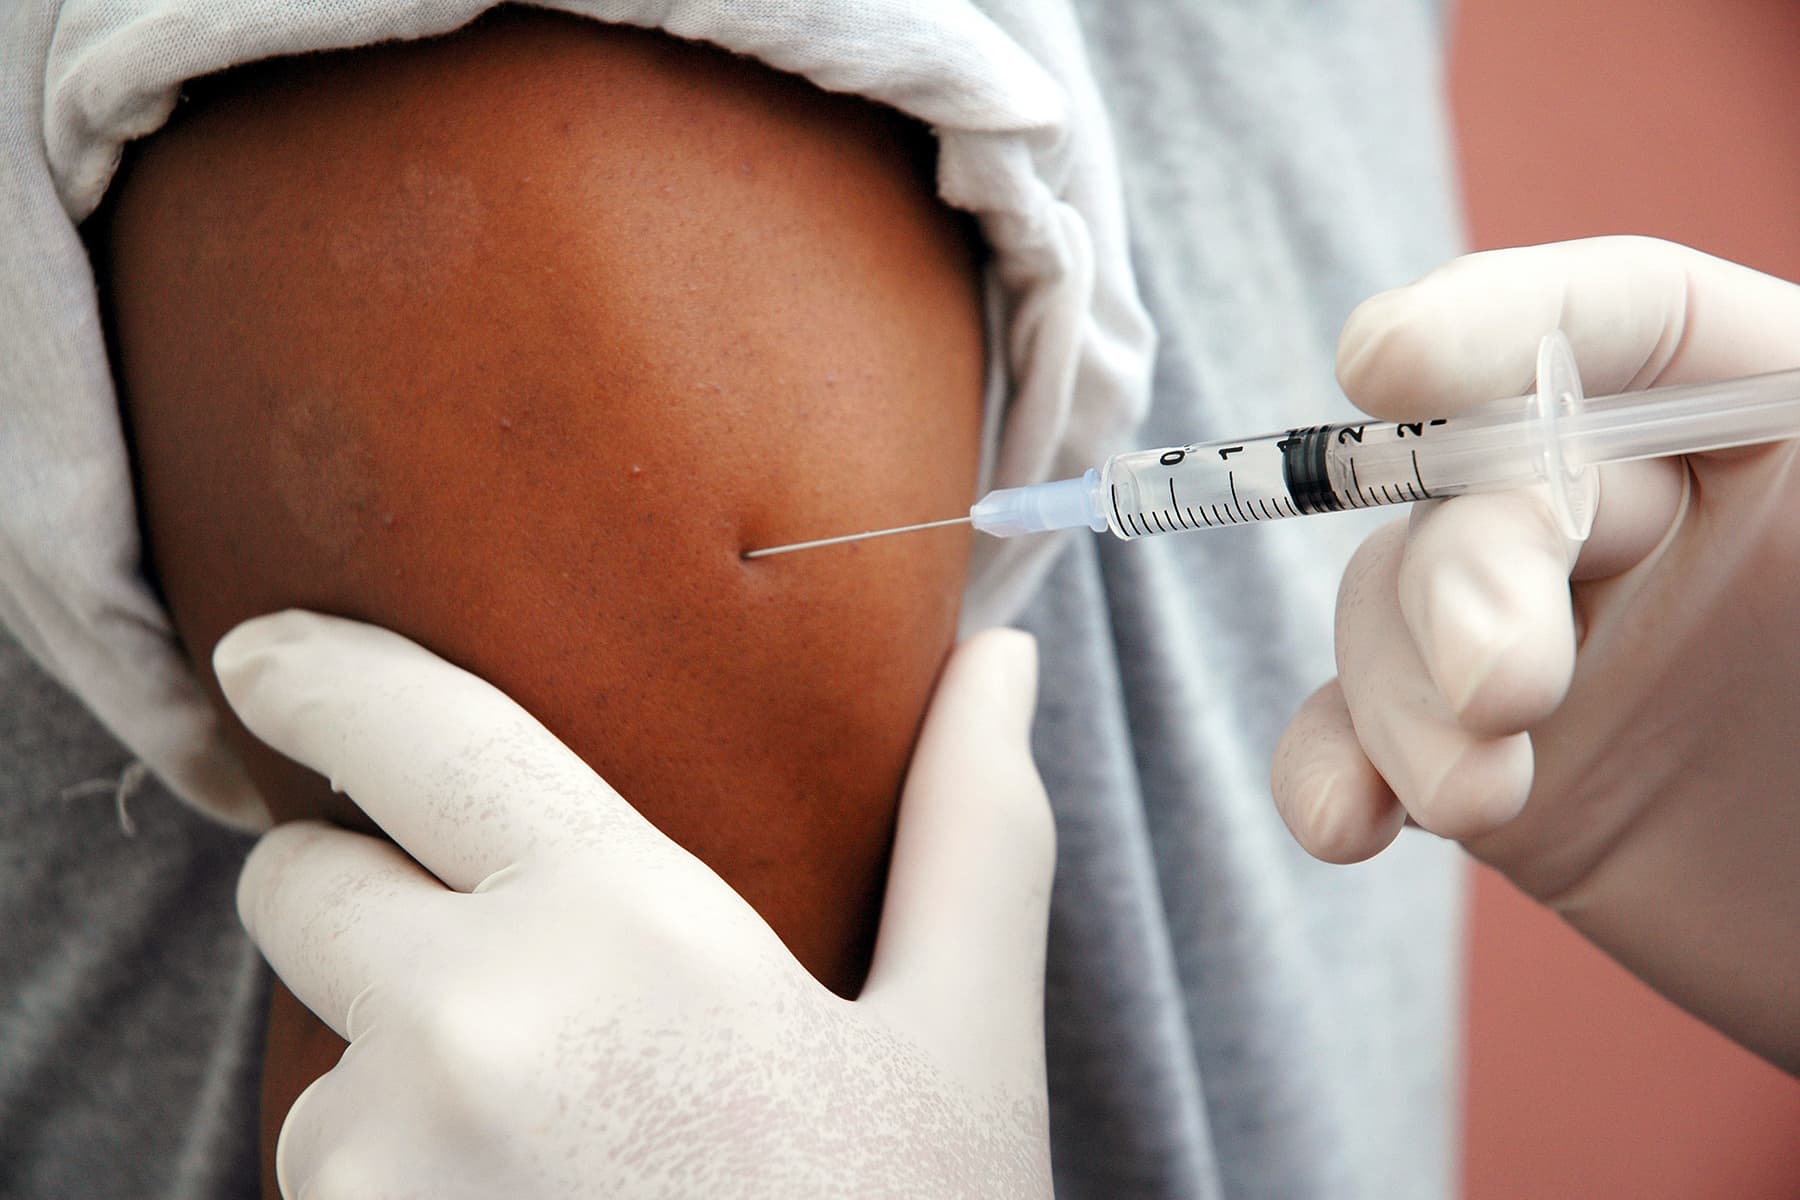 Survey: 60% of Americans Will Delay or Skip Flu Shot This Year